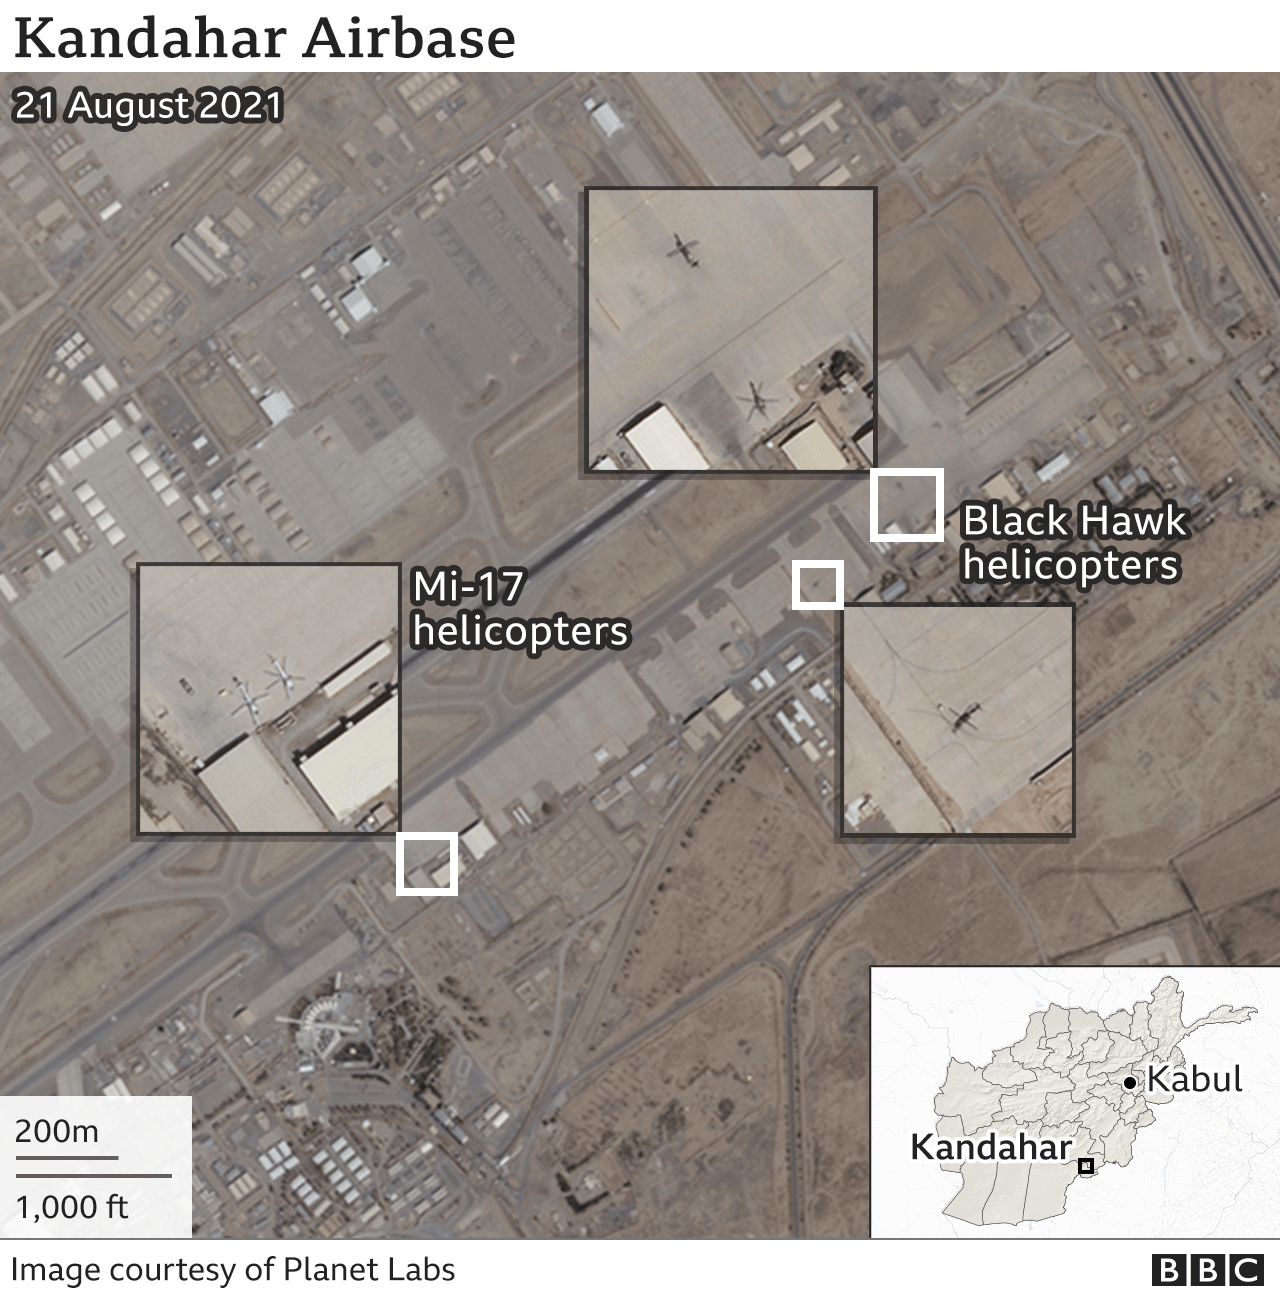 Satellite image of Kandahar Air Base with military aircraft on the ground. Updated 27 Aug.